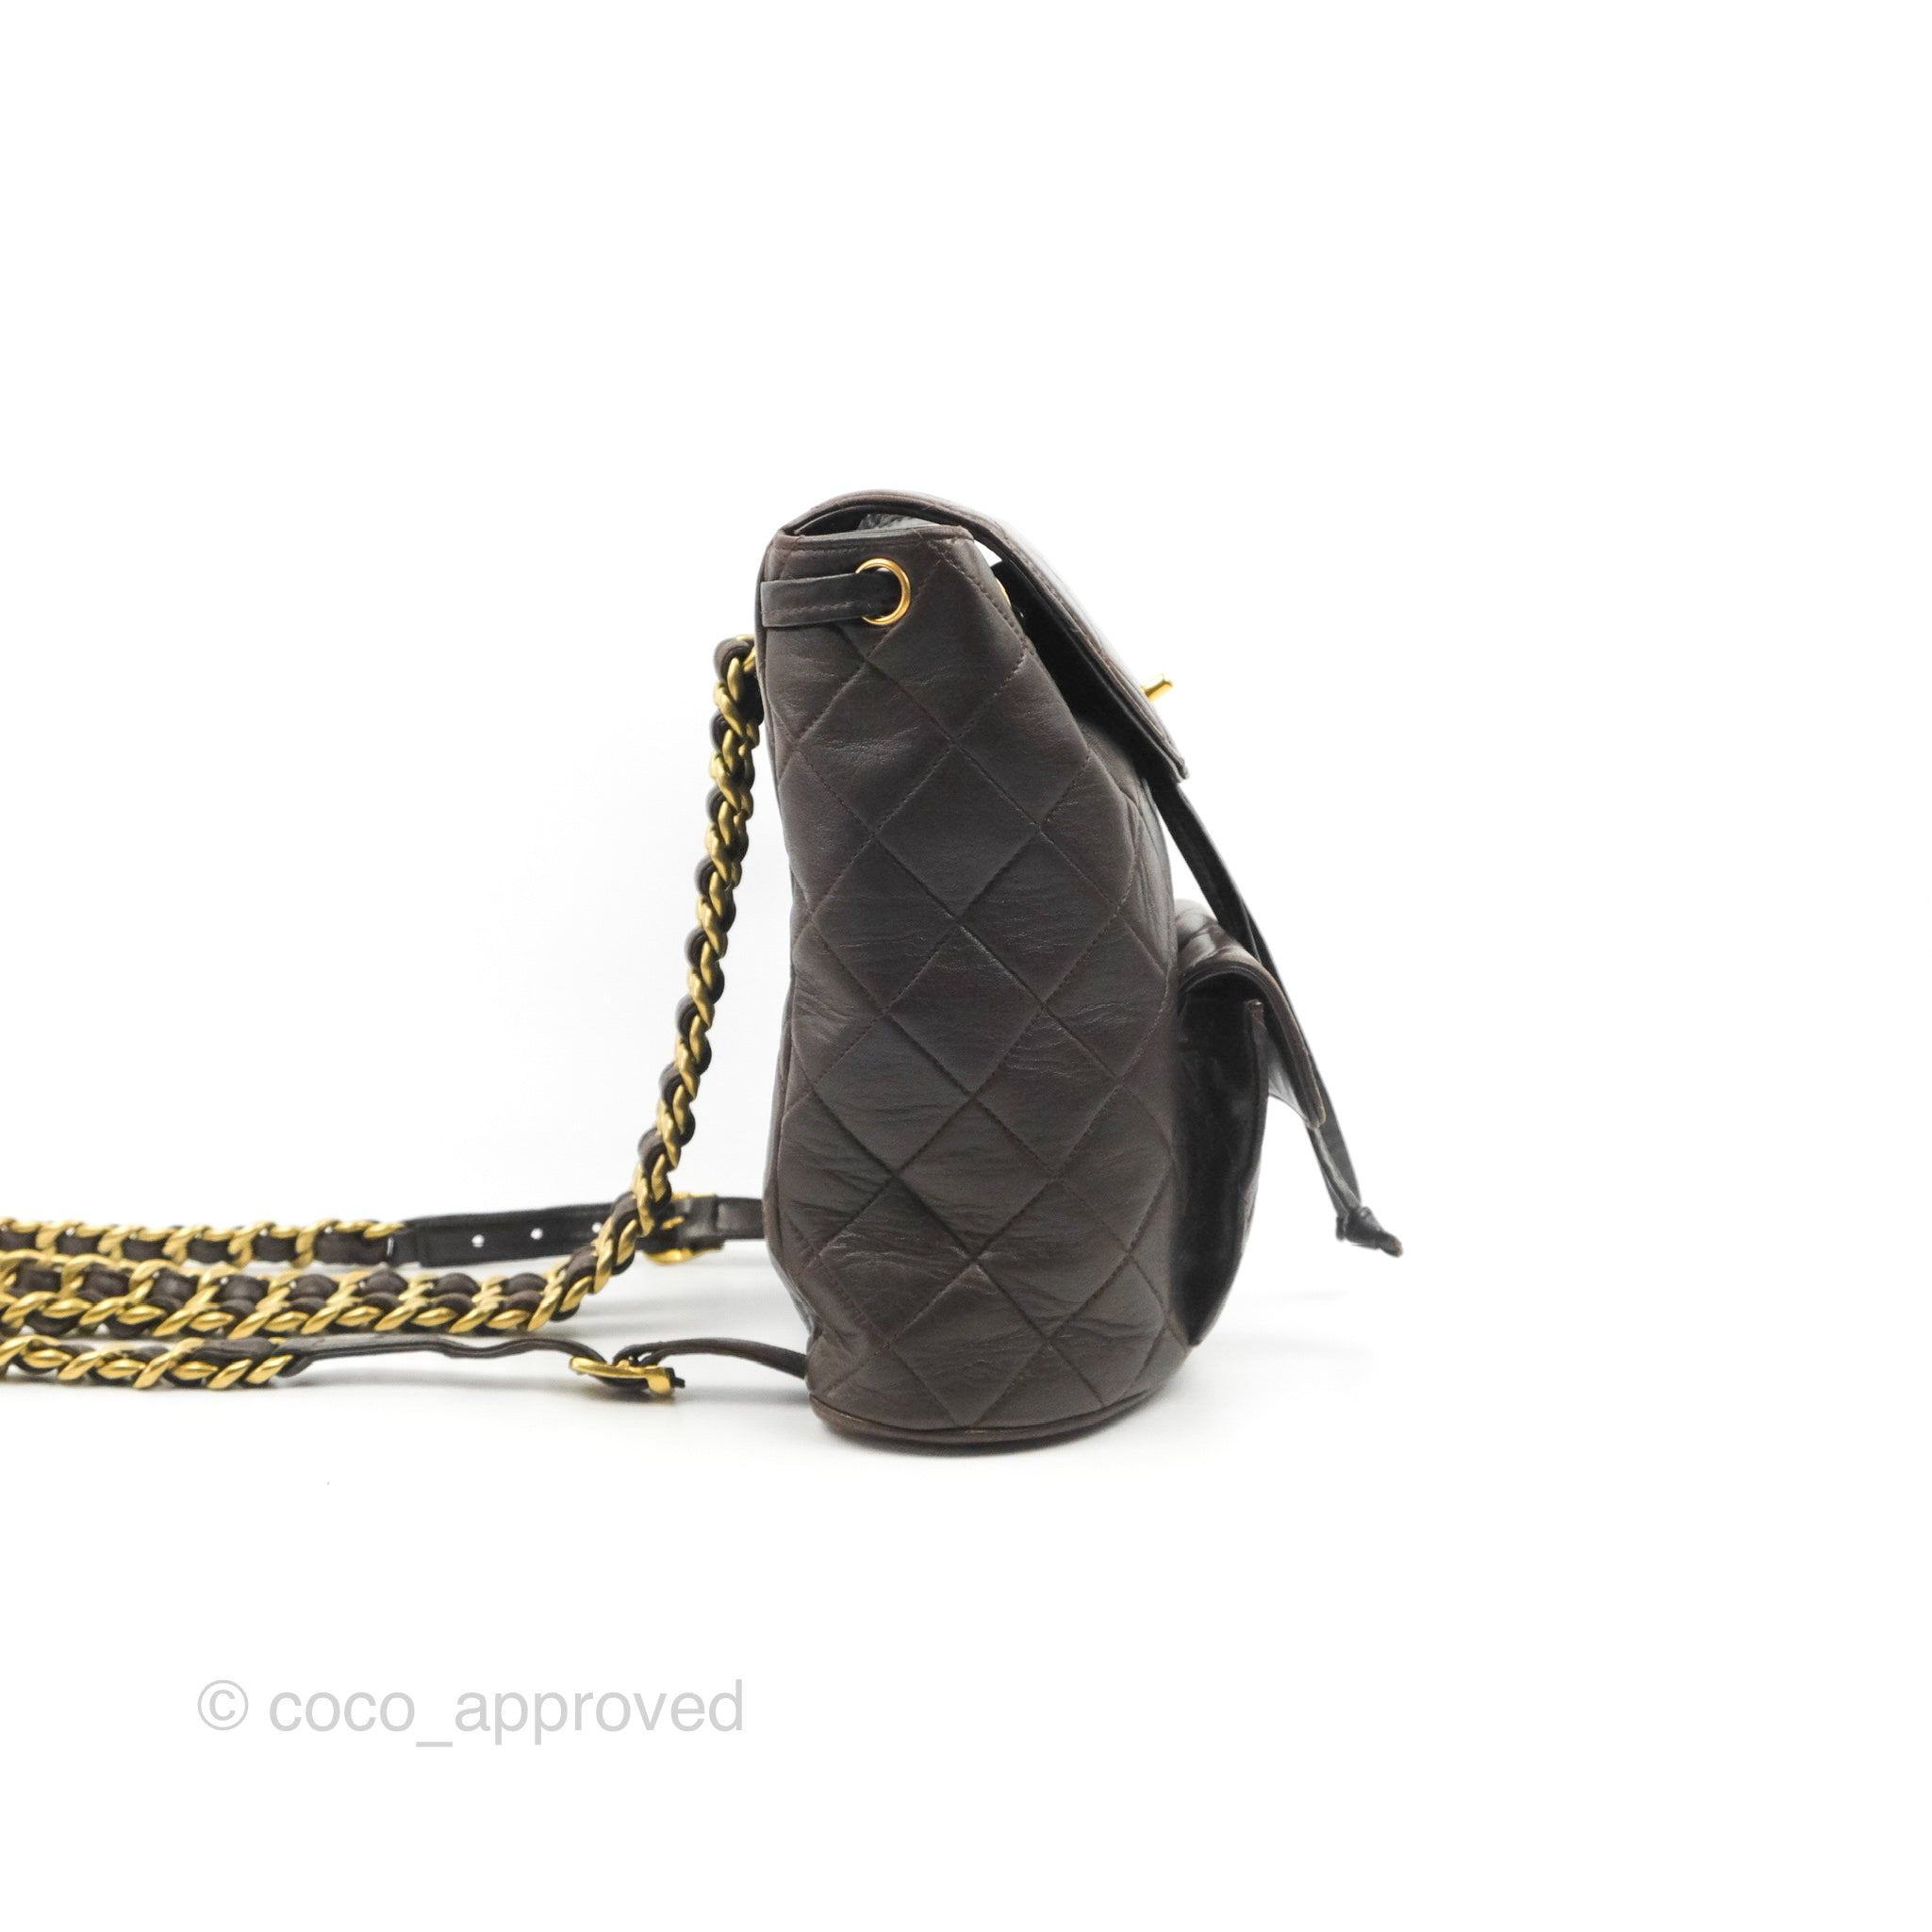 Chanel Sac à Dos Backpack in Brown Quilted Leather